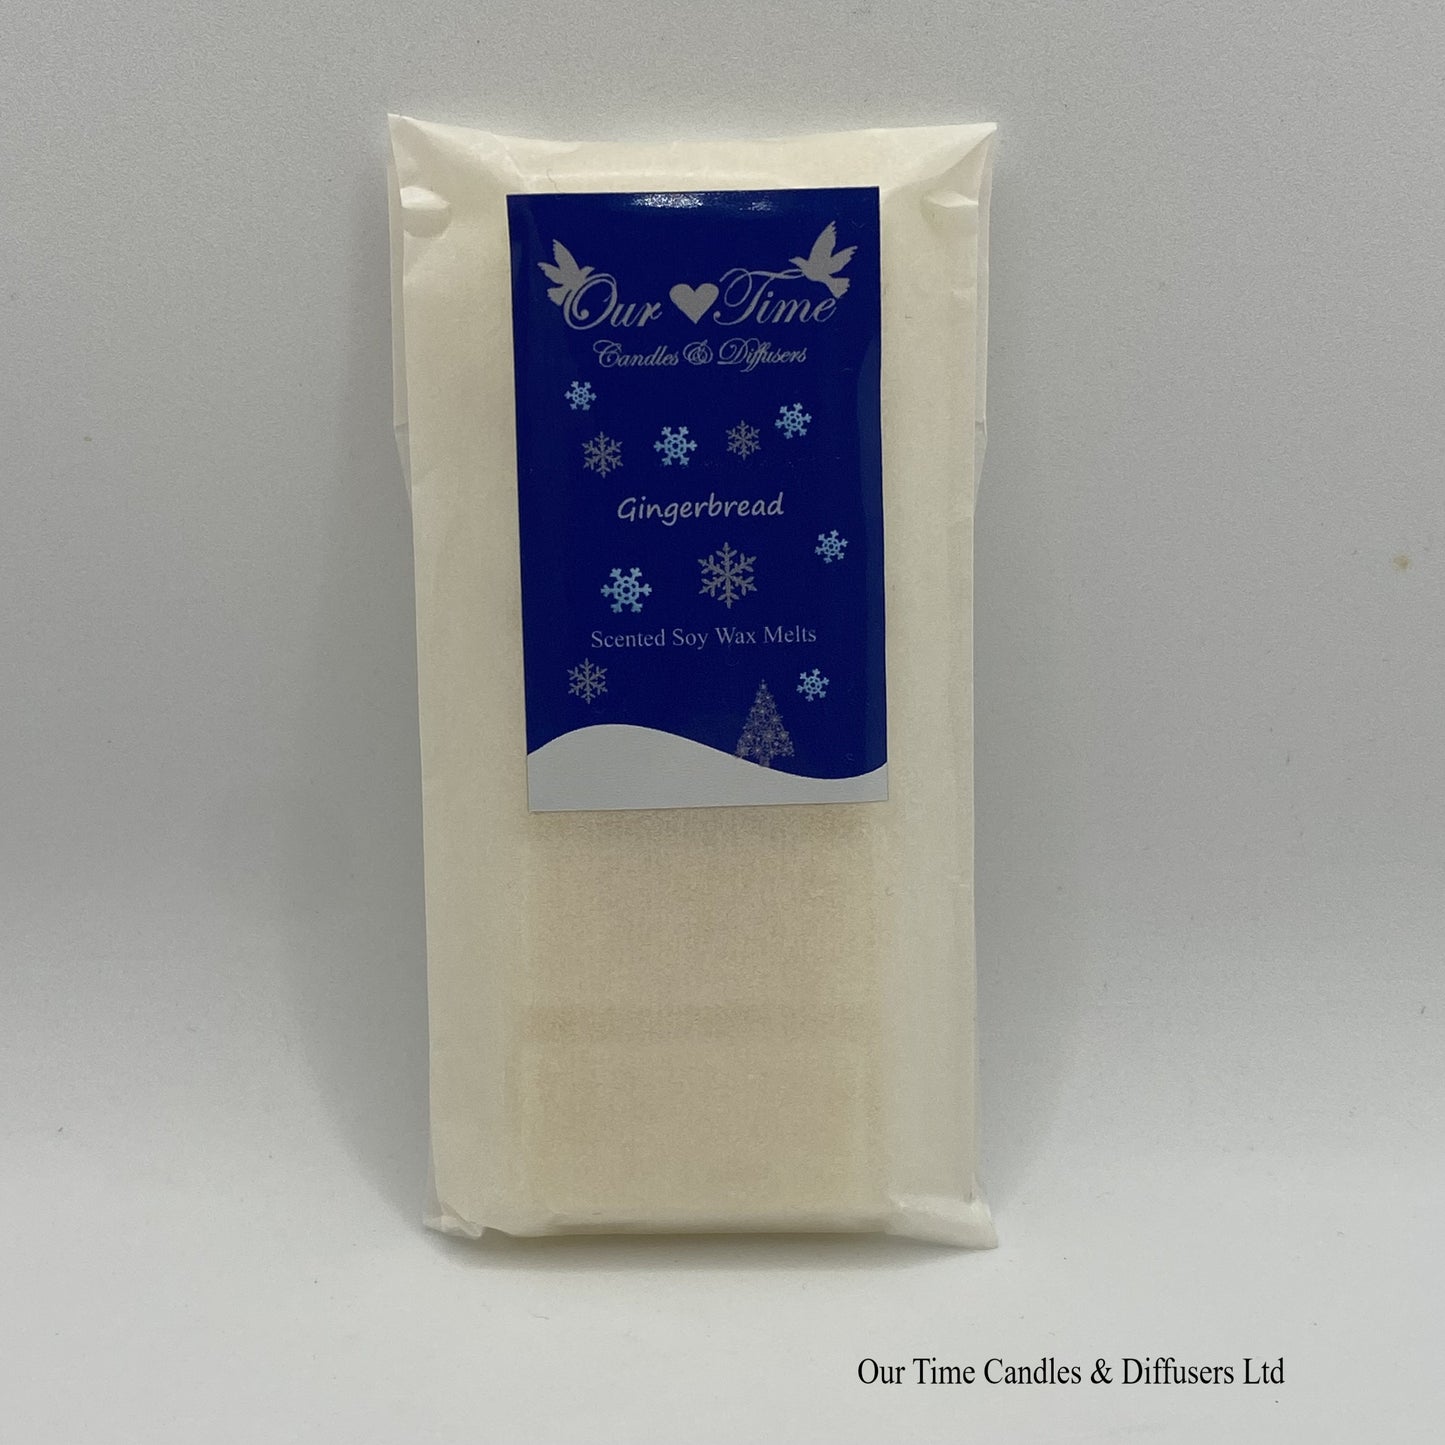 Gingerbread Christmas Scented Wax Melts